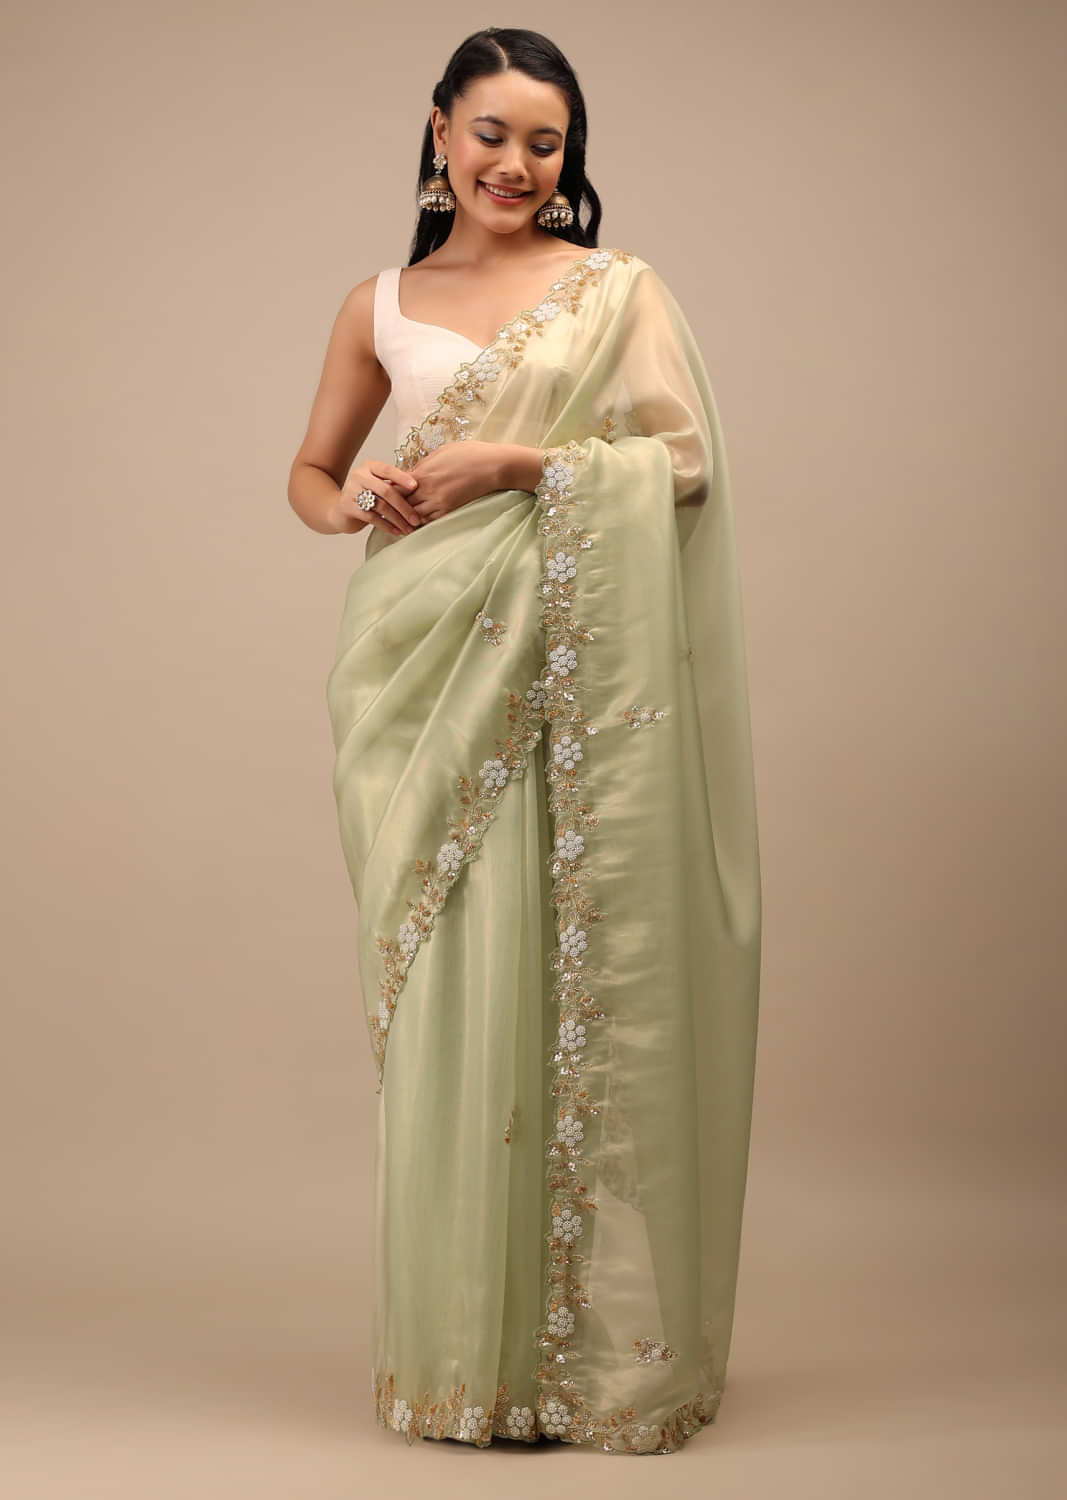 Foam Green Tissue Saree In White Moti And Cut Dana Embroidery Buttis, Border Has Cutwork Embroidery Detailing